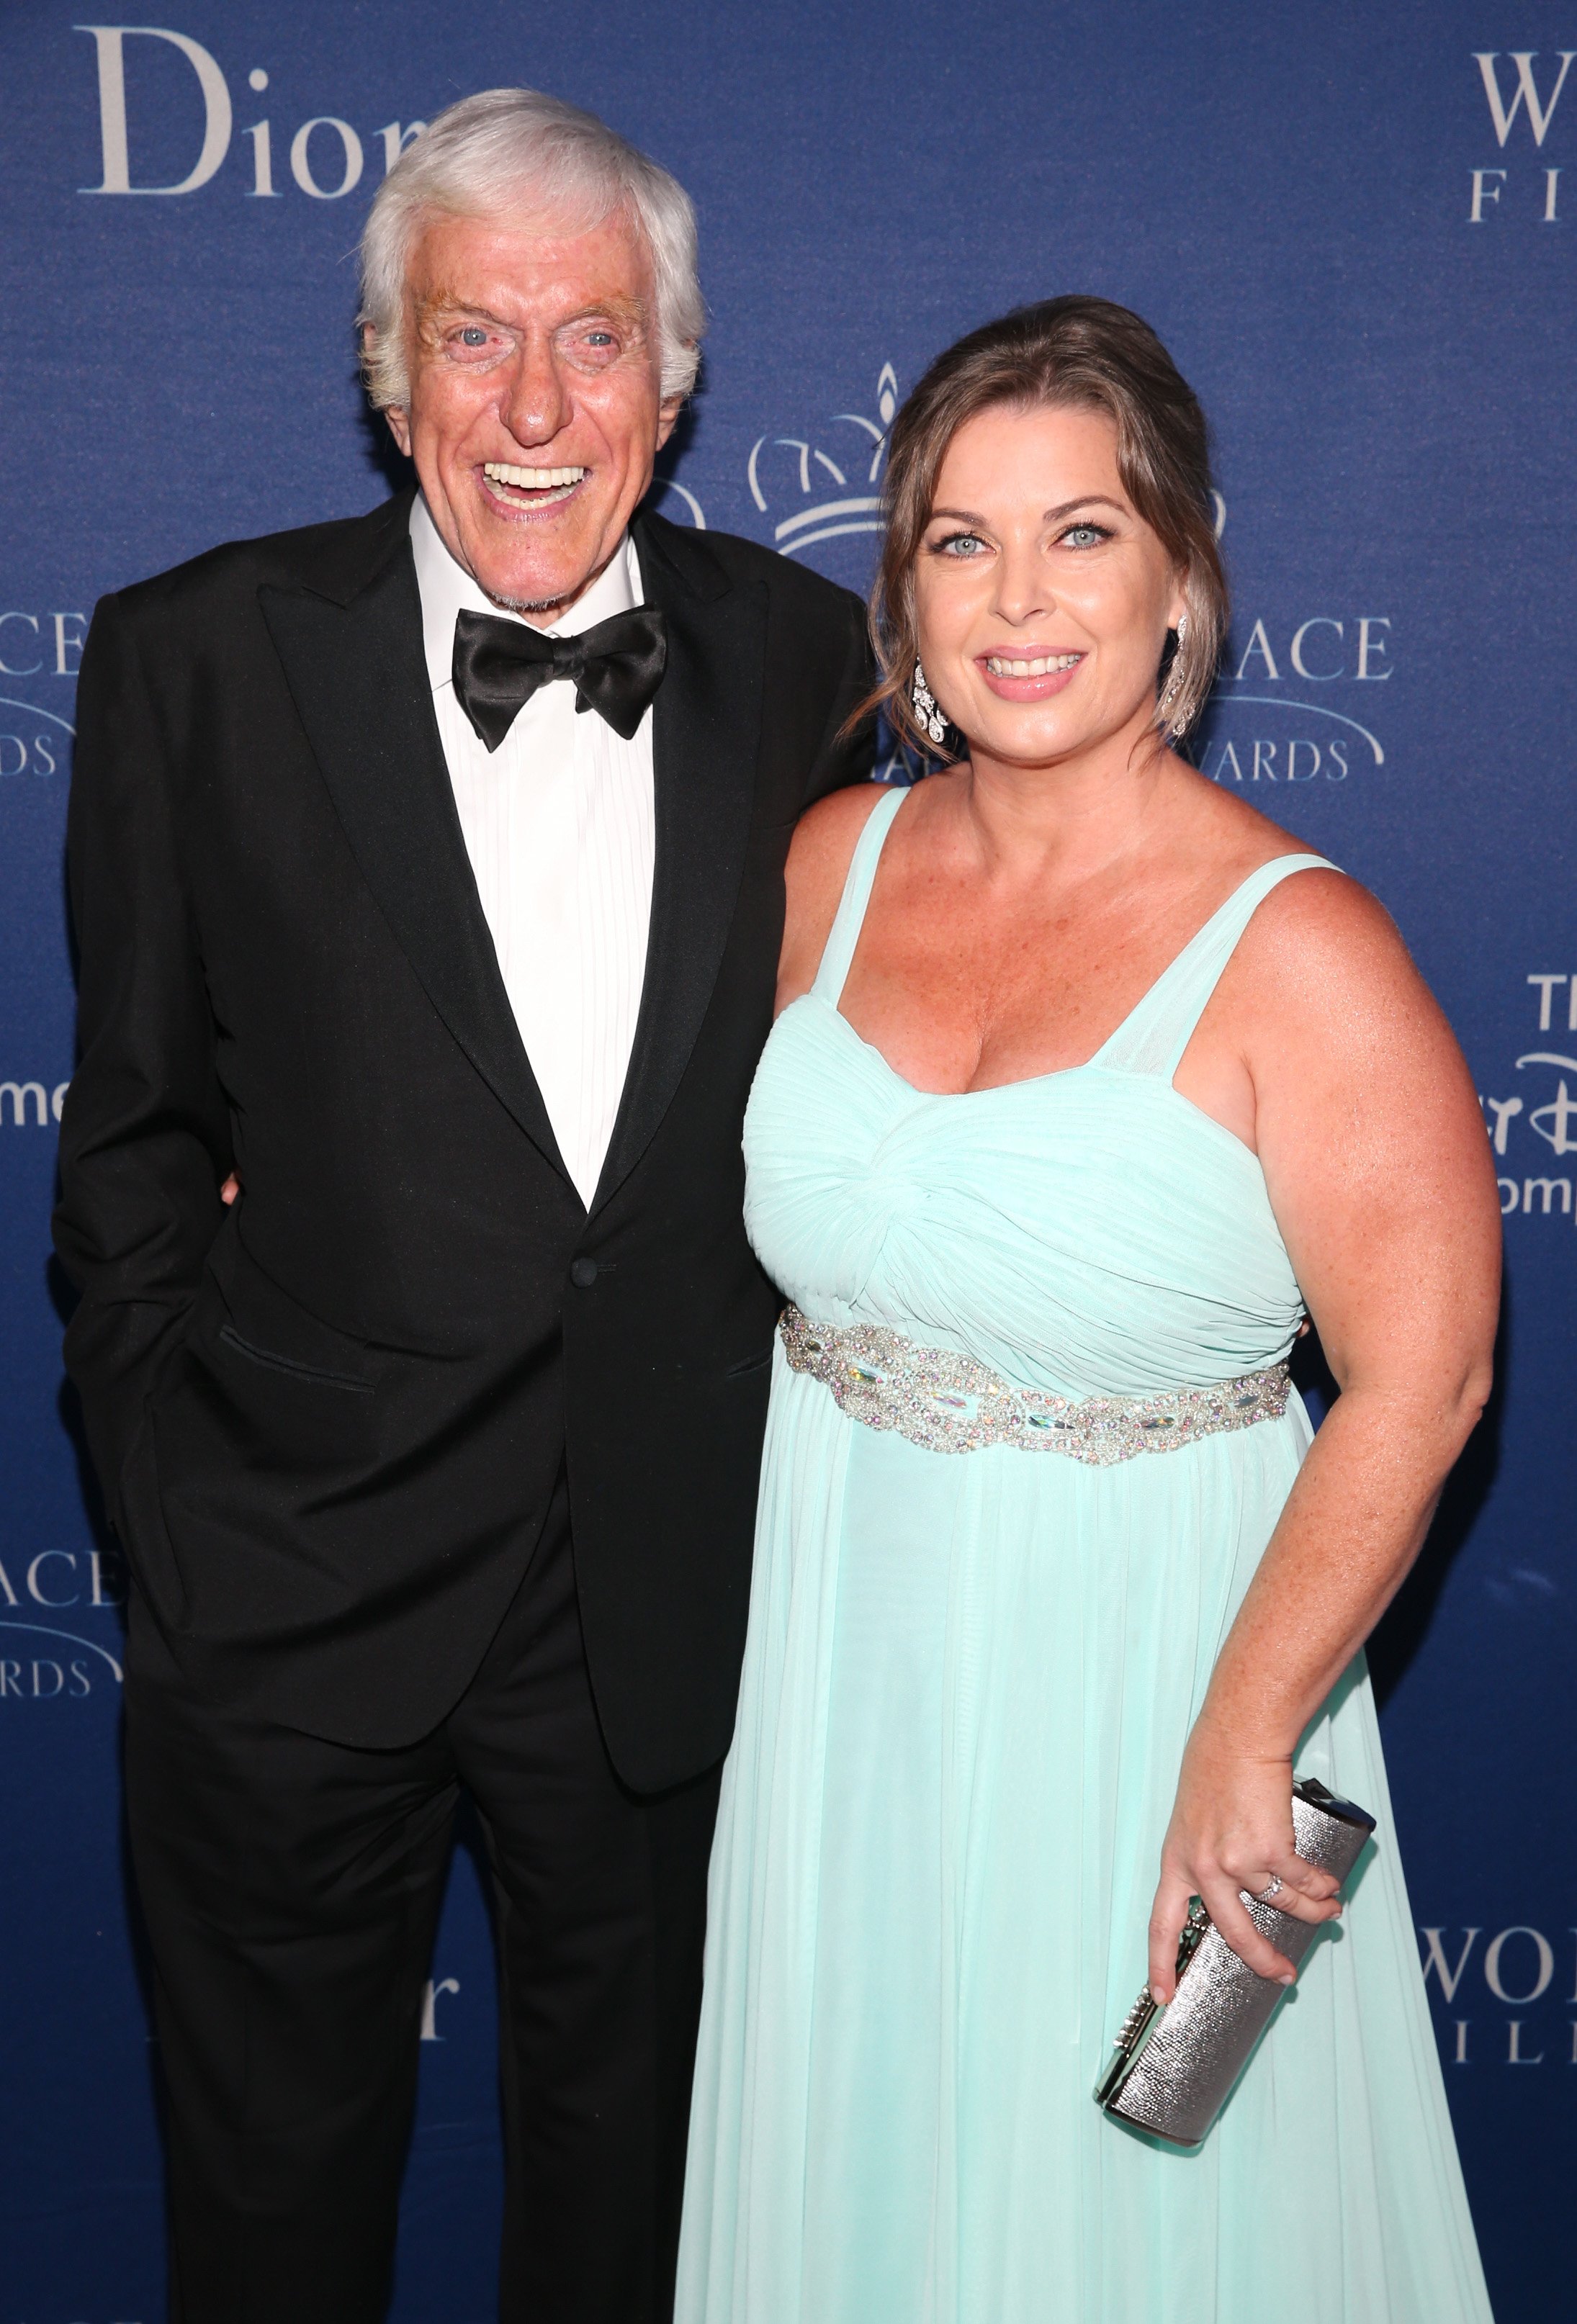 Dick Van Dyke (L) and Arlene Silver attend the 2014 Princess Grace Awards Gala with presenting sponsor Christian Dior Couture at the Beverly Wilshire Four Seasons Hotel on October 8, 2014 in Beverly Hills, California. | Source: Getty Images